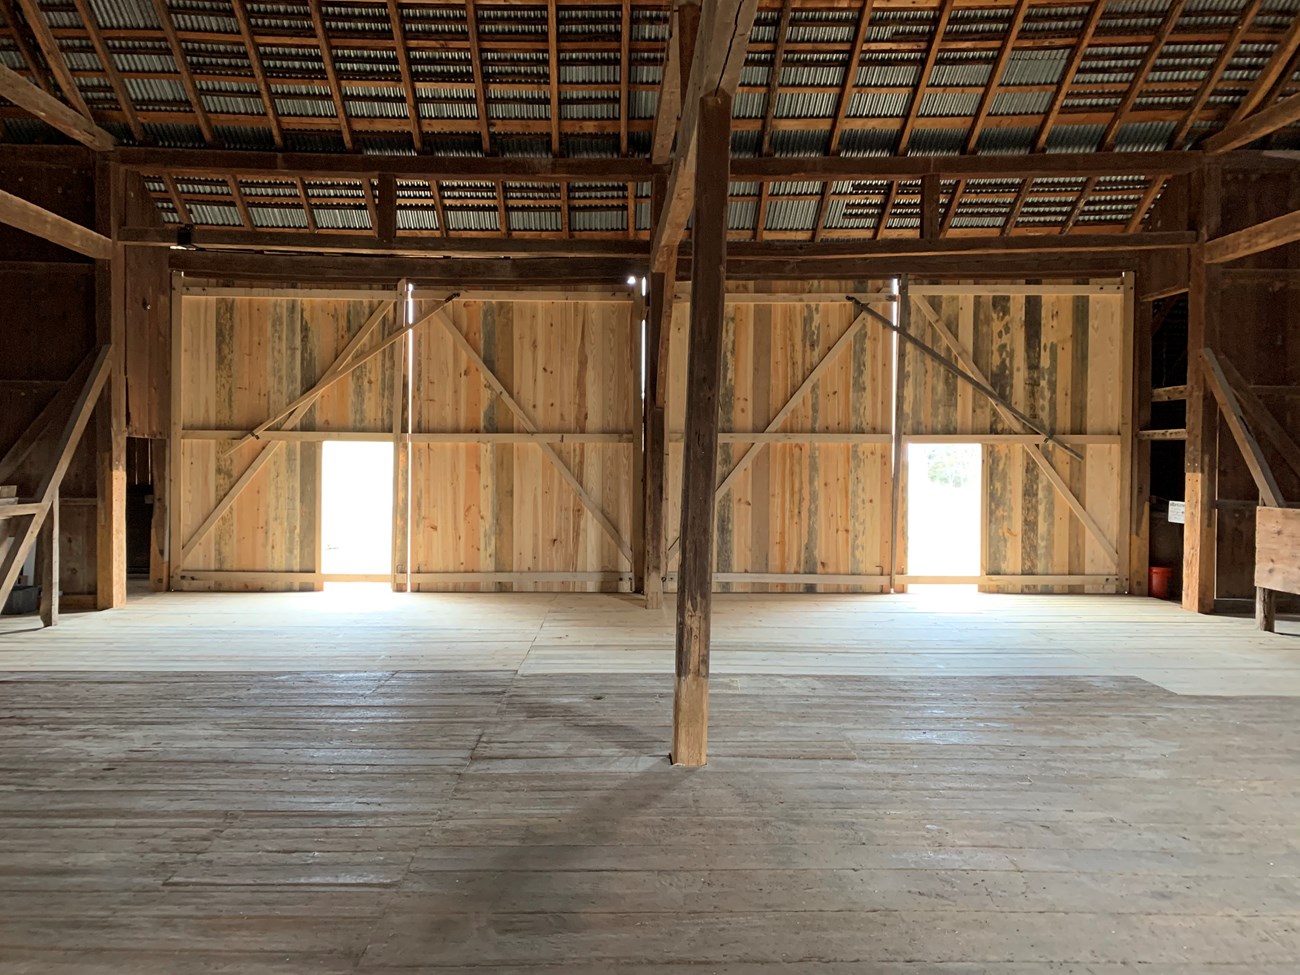 Inside a historic wooden barn. Large open interior with two smaller doors on the far wall. The doors are inset in full-wall sized barn doors.